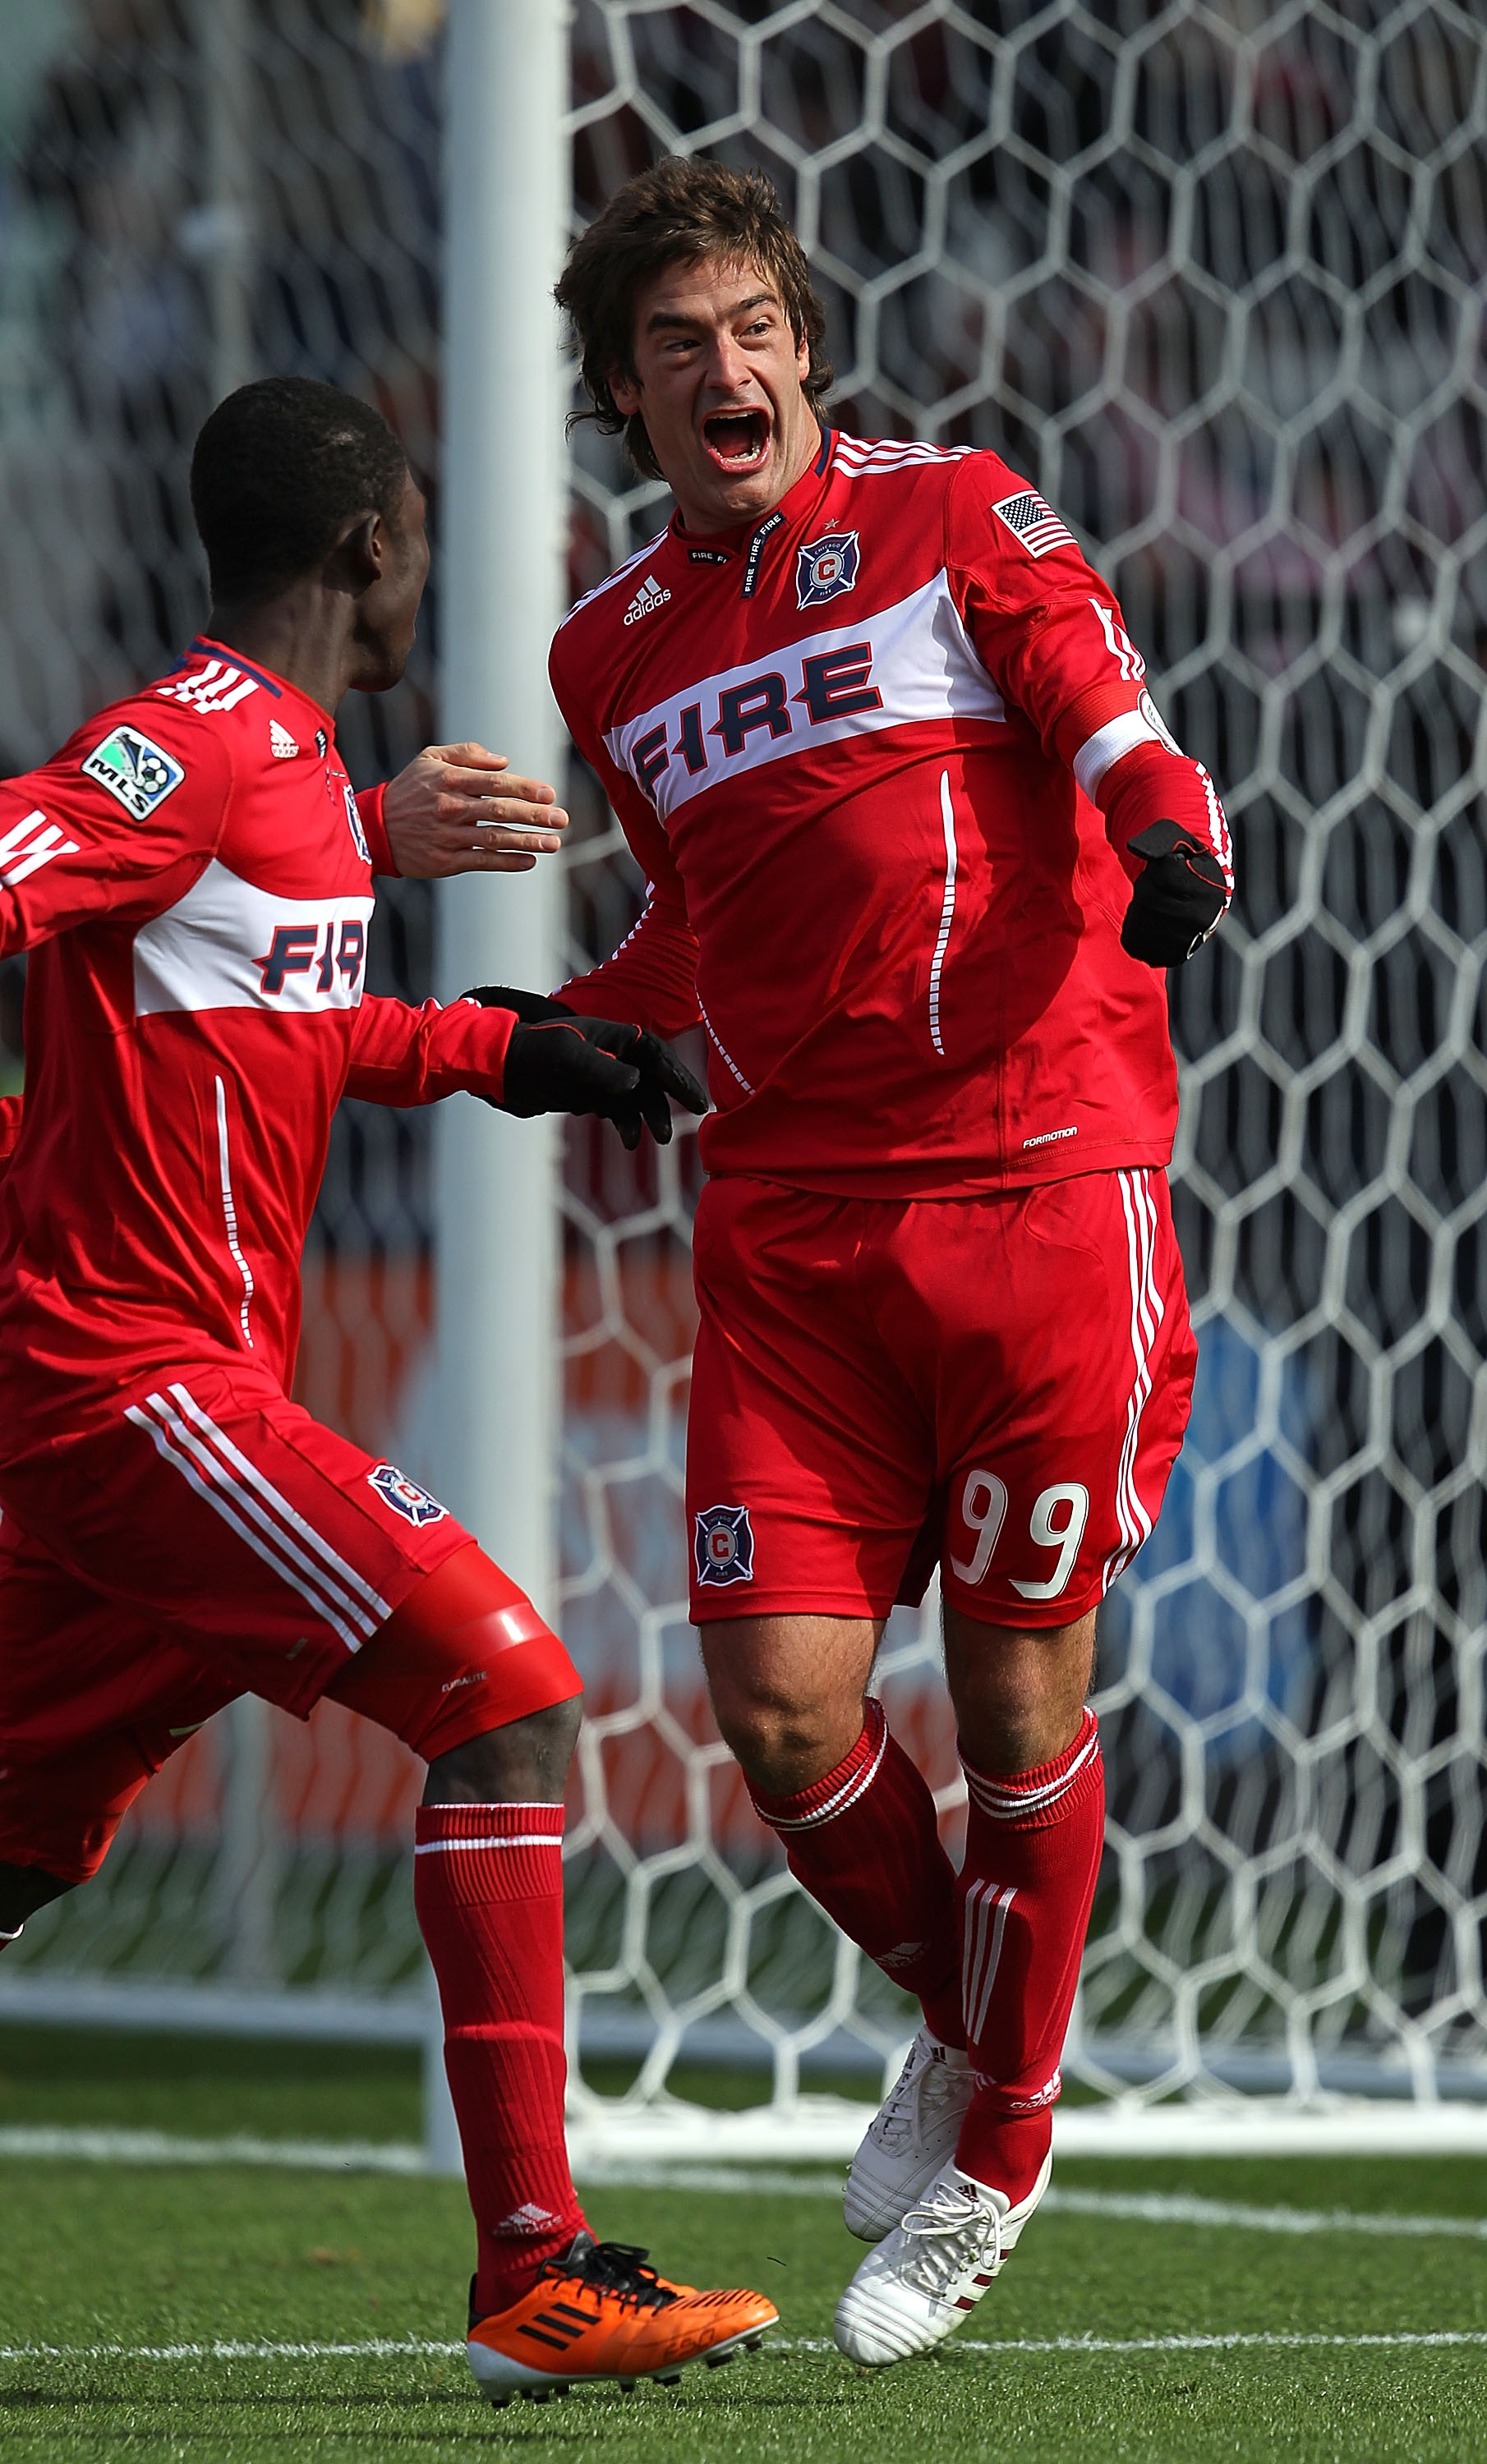 BRIDGEVIEW, IL - MARCH 26: Diego Chaves #99 of the Chicago Fire celebrates a penalty kick goal with teammate Patrick Nyarko #14 against Sporting Kansas City during an MLS match at Toyota Park on March 26, 2010 in Bridgeview, Illinois. The Fire defeated Sp